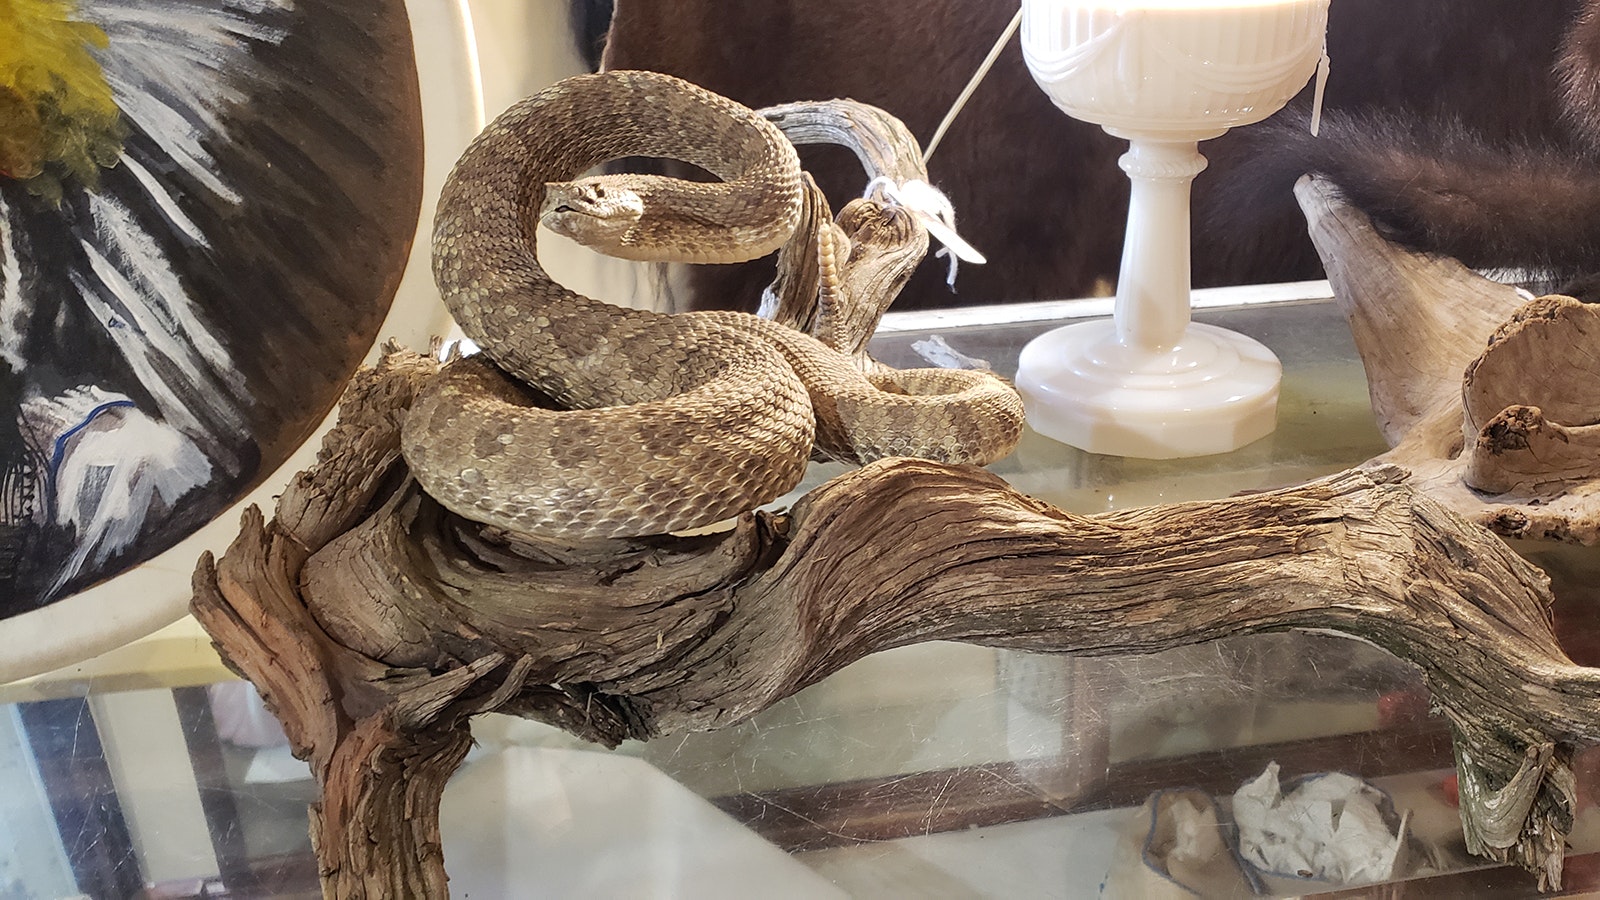 A taxidermied rattlesnake forever poised to strike.